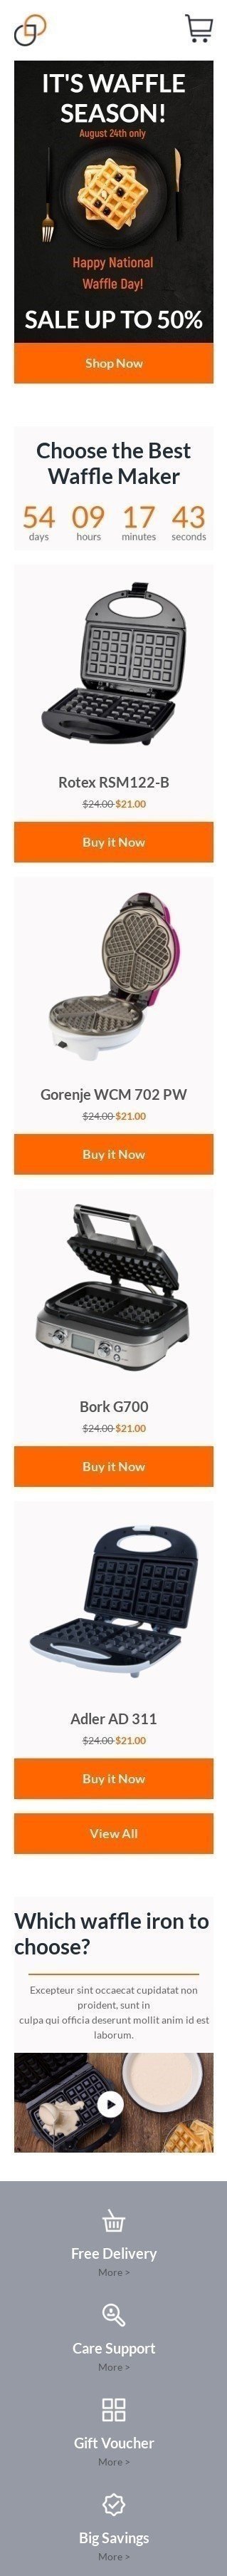 National Waffle Day Email Template "Best Waffle Maker" for Gadgets industry mobile view